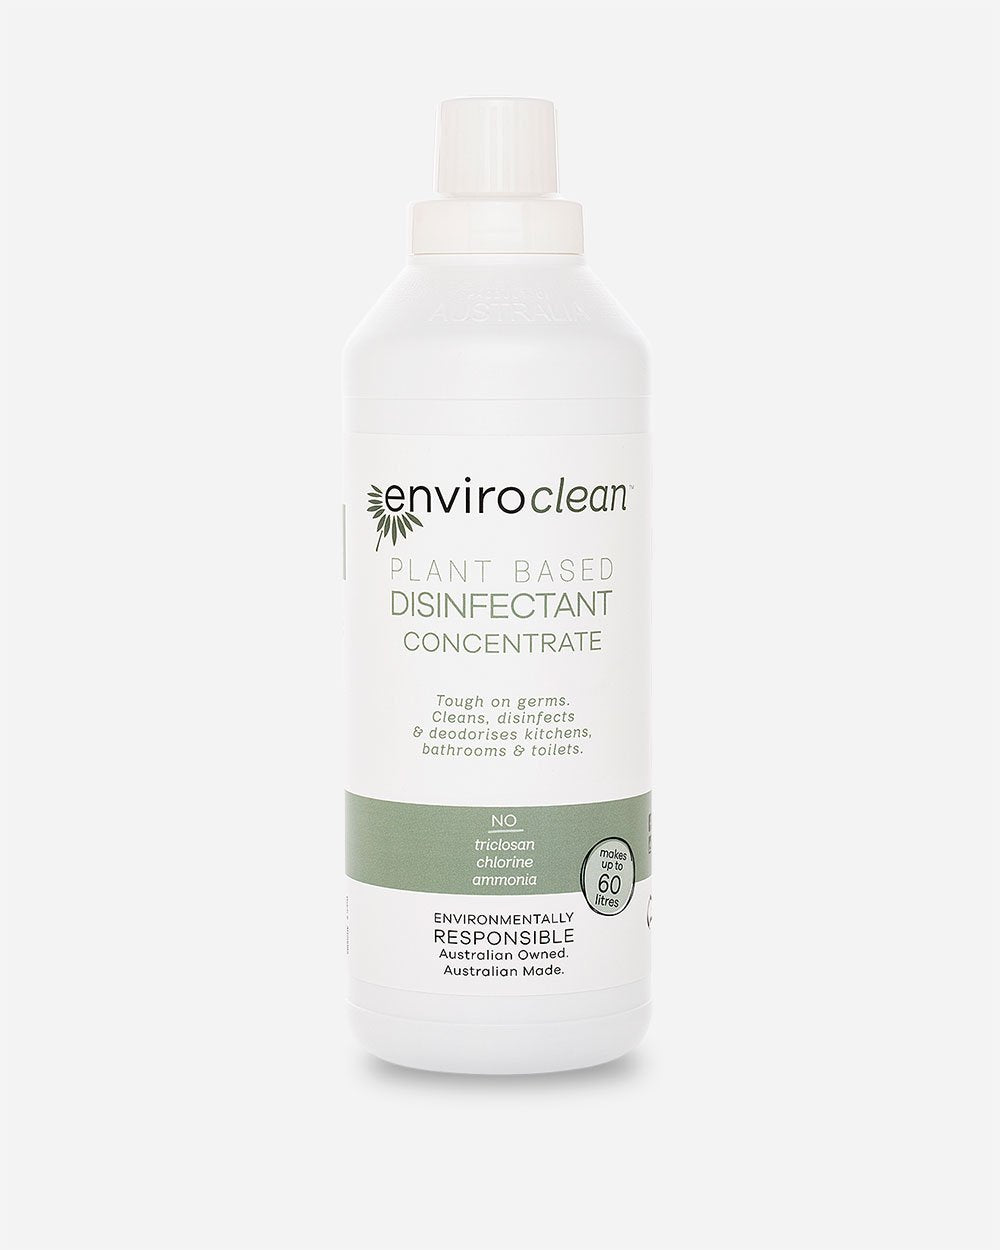 Disinfectant from Enviroclean